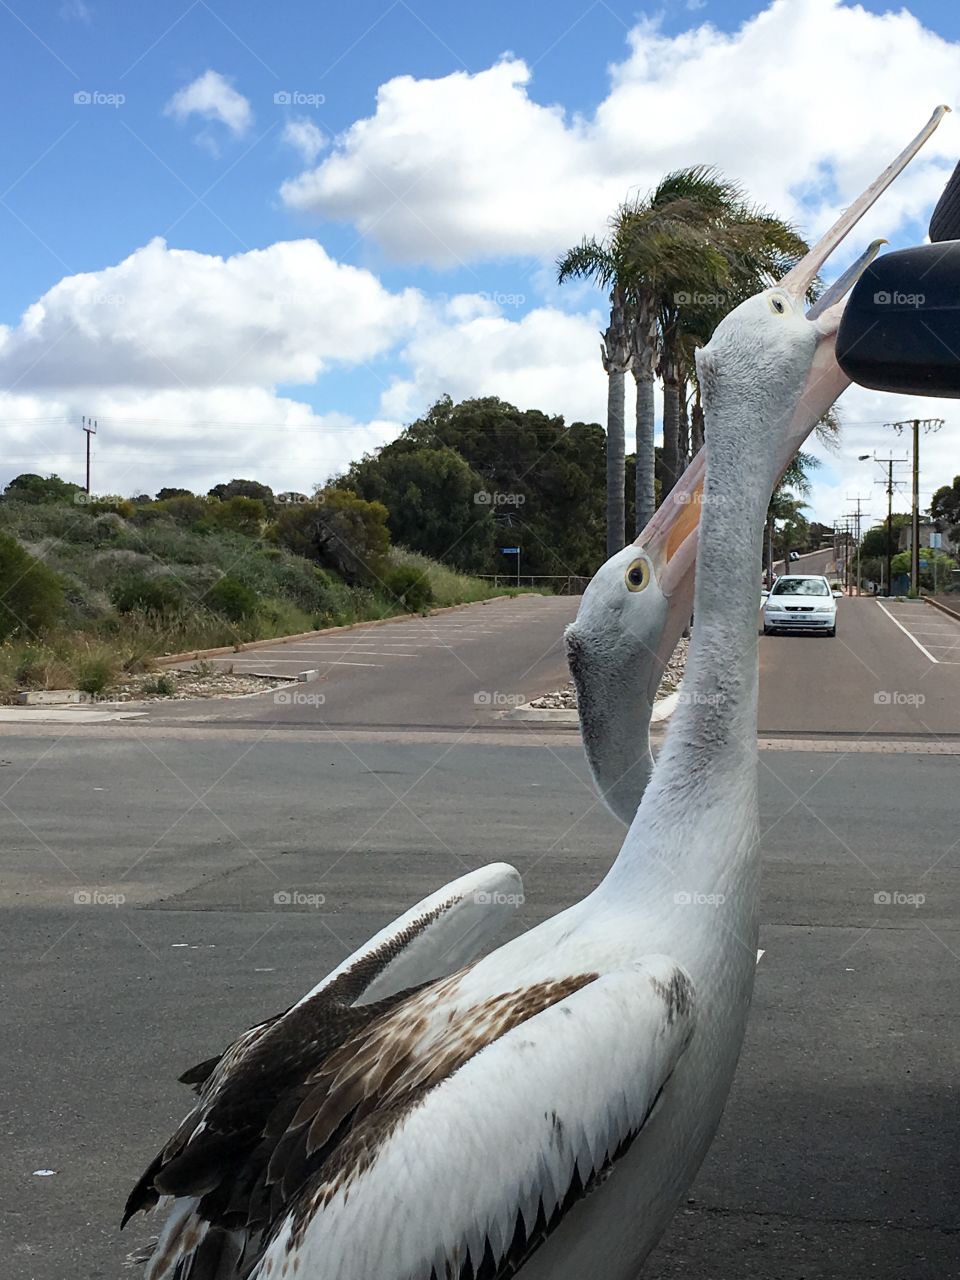 Two Pelicans begging for food from people in parked car at beach in Australia
